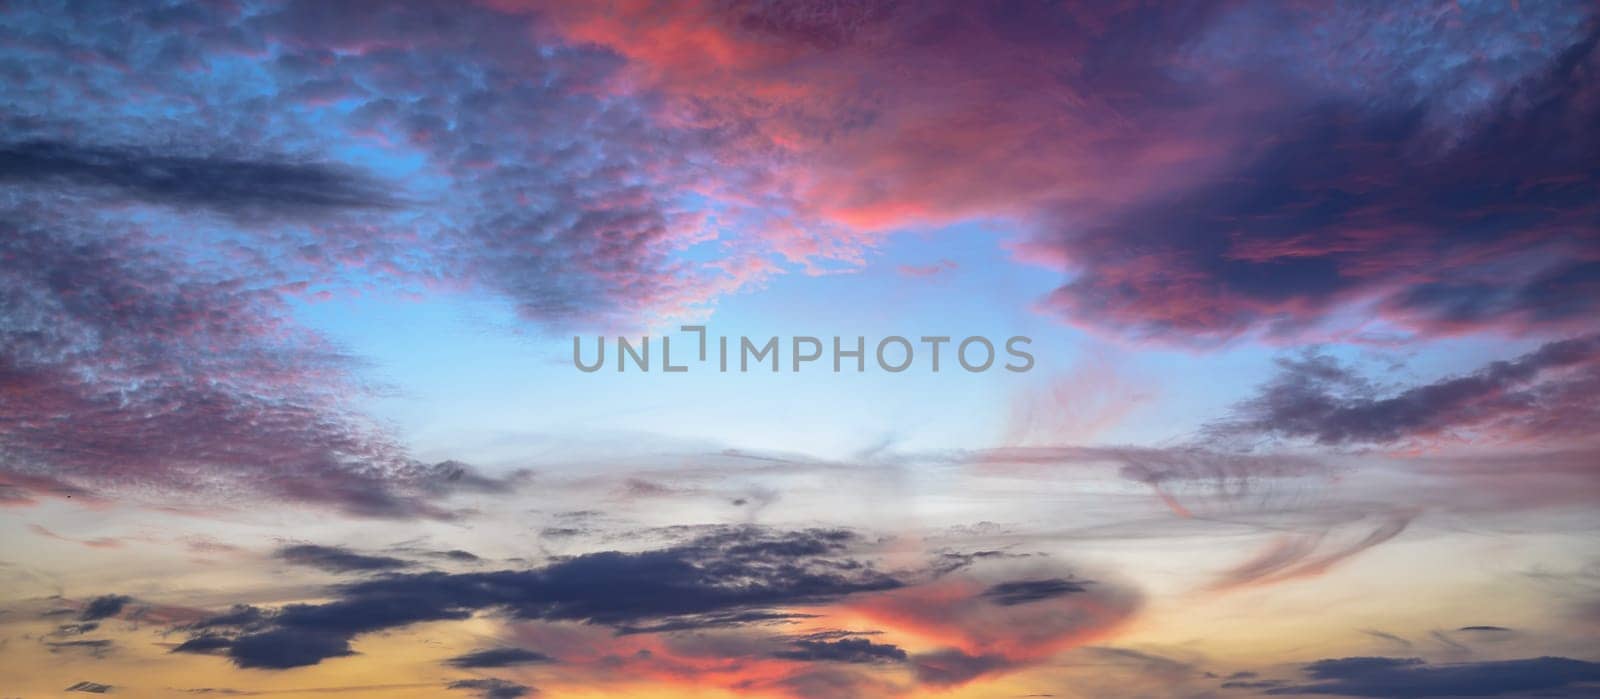 Beautiful Landscape Background Sky Clouds Sunset Oil Painting View Wallpaper Landscape Light Colours Purple Anime style Magic and Colorfu